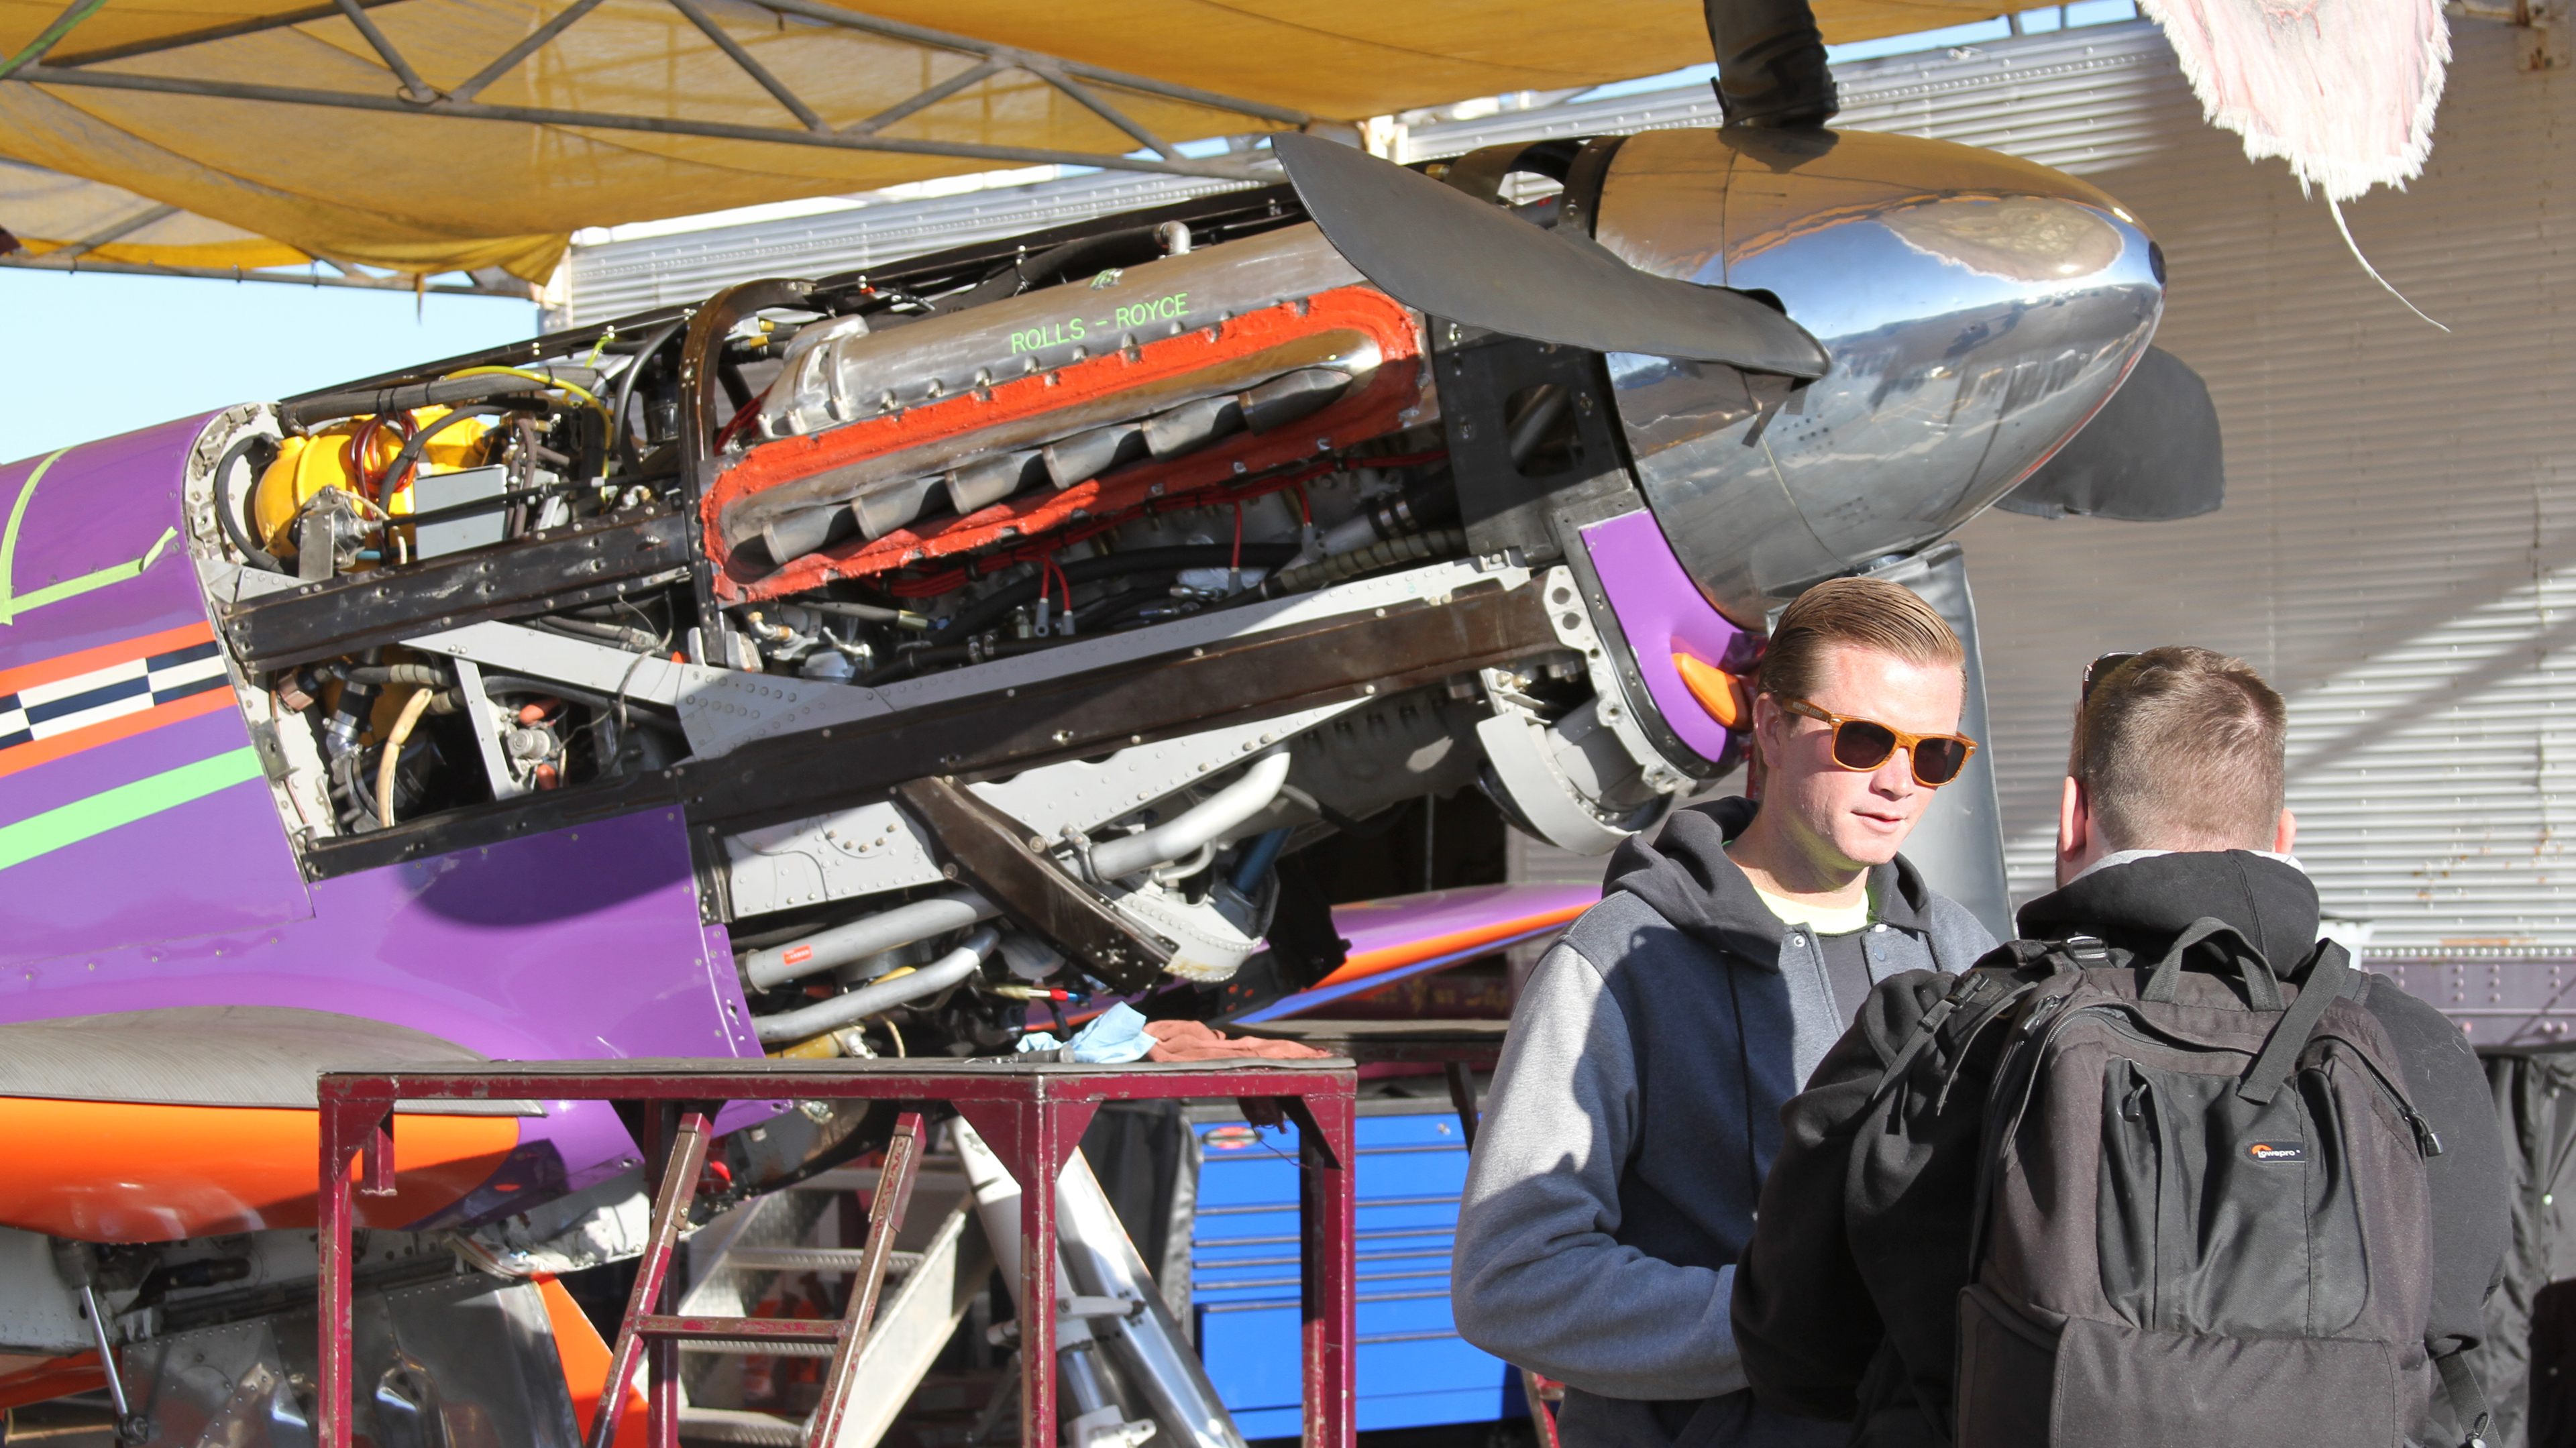 Voodoo, Bob Button's highly modified P-51D, is uncowled in the Reno pits before racing begins. Pilot Steve Hinton won the 2013 and 2014 Unlimited Gold in this airplane. Photo by Robert Fisher.